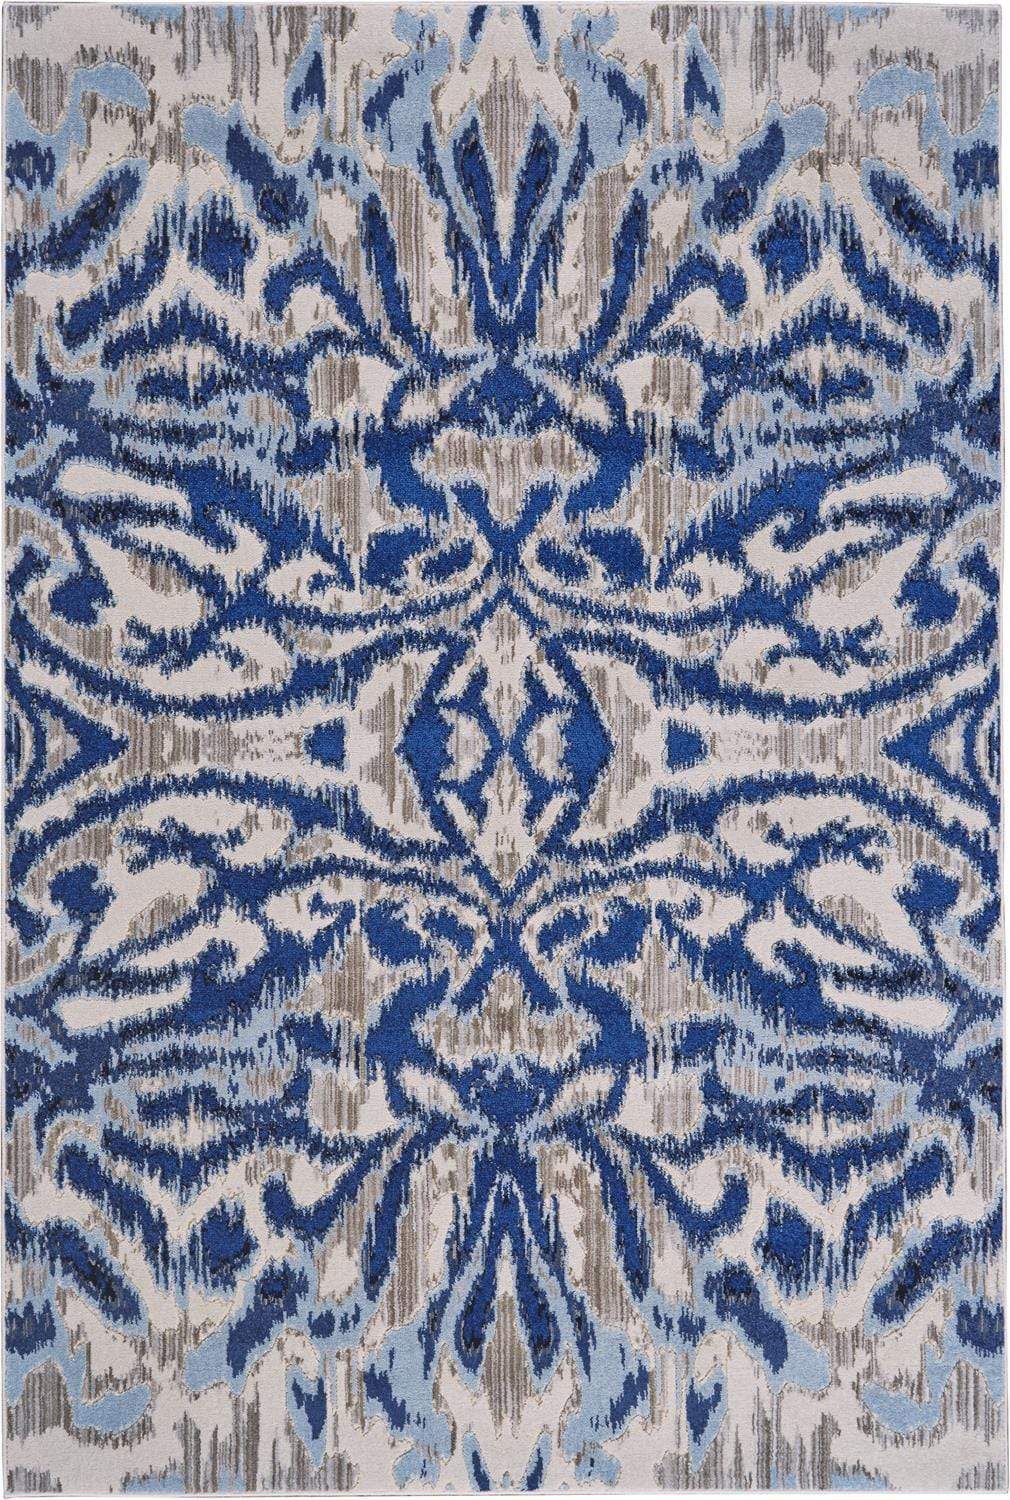 Feizy Feizy Milton Abstract Ikat Print Rug - Available in 8 Sizes - Classic & Ice Blue 2'-2" x 4' 6533467FBHZ000A22